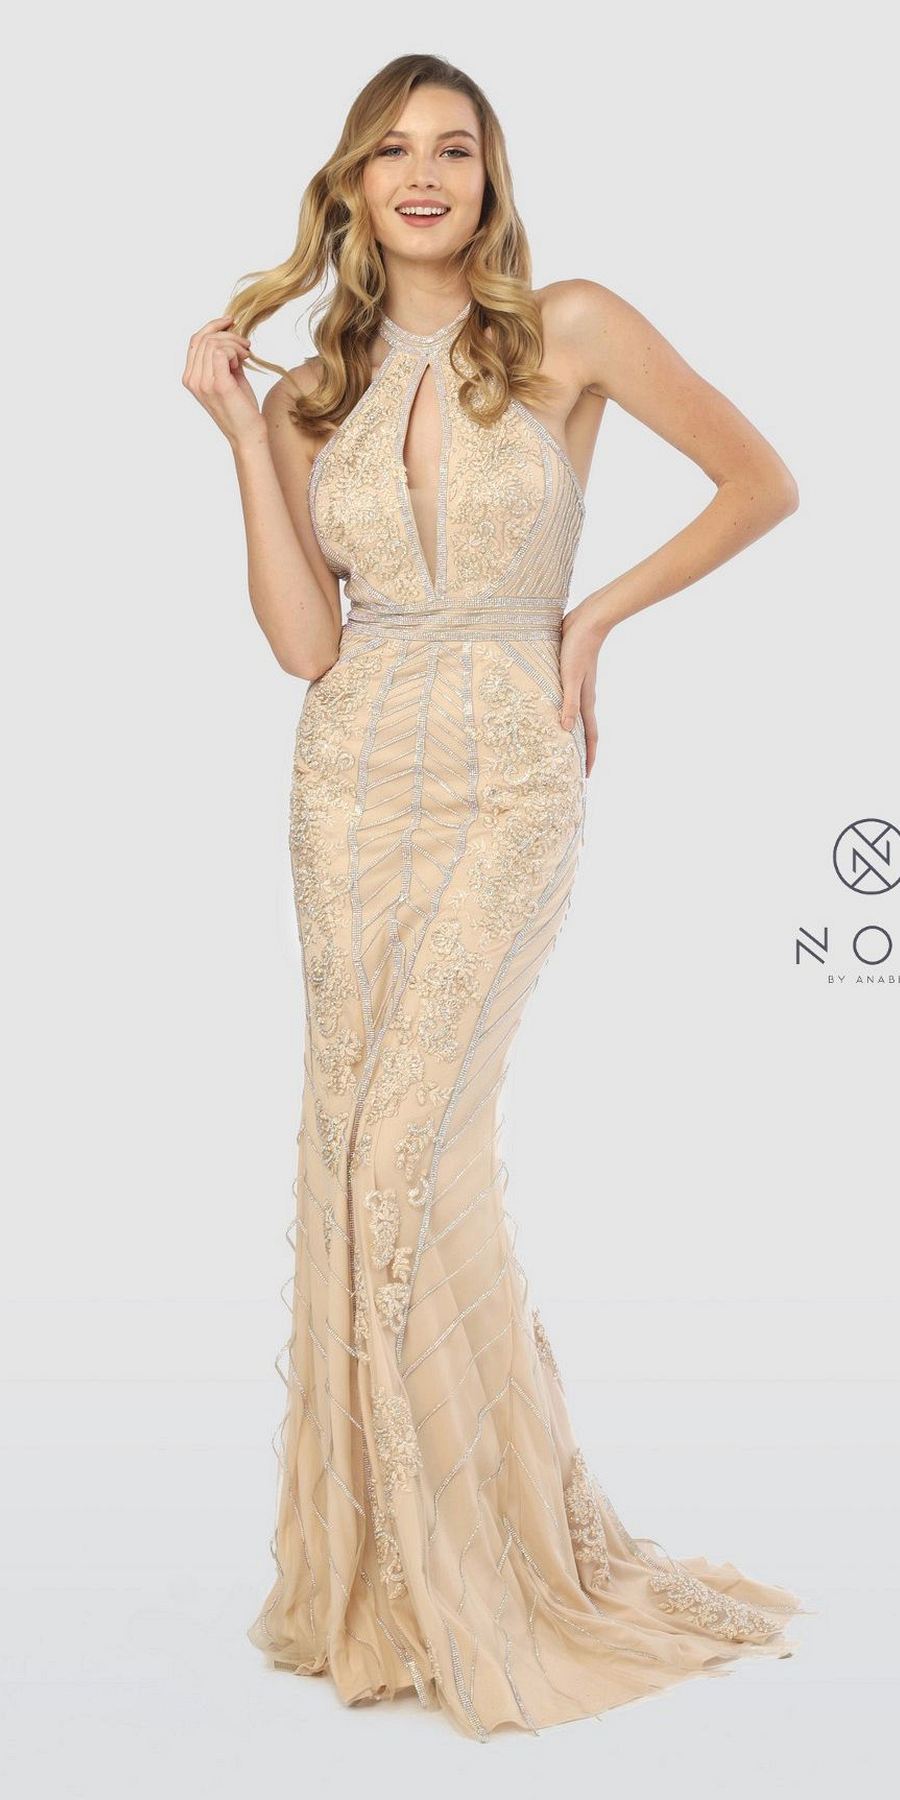 Gold Appliqued Long Prom Dress with Keyhole Bodice